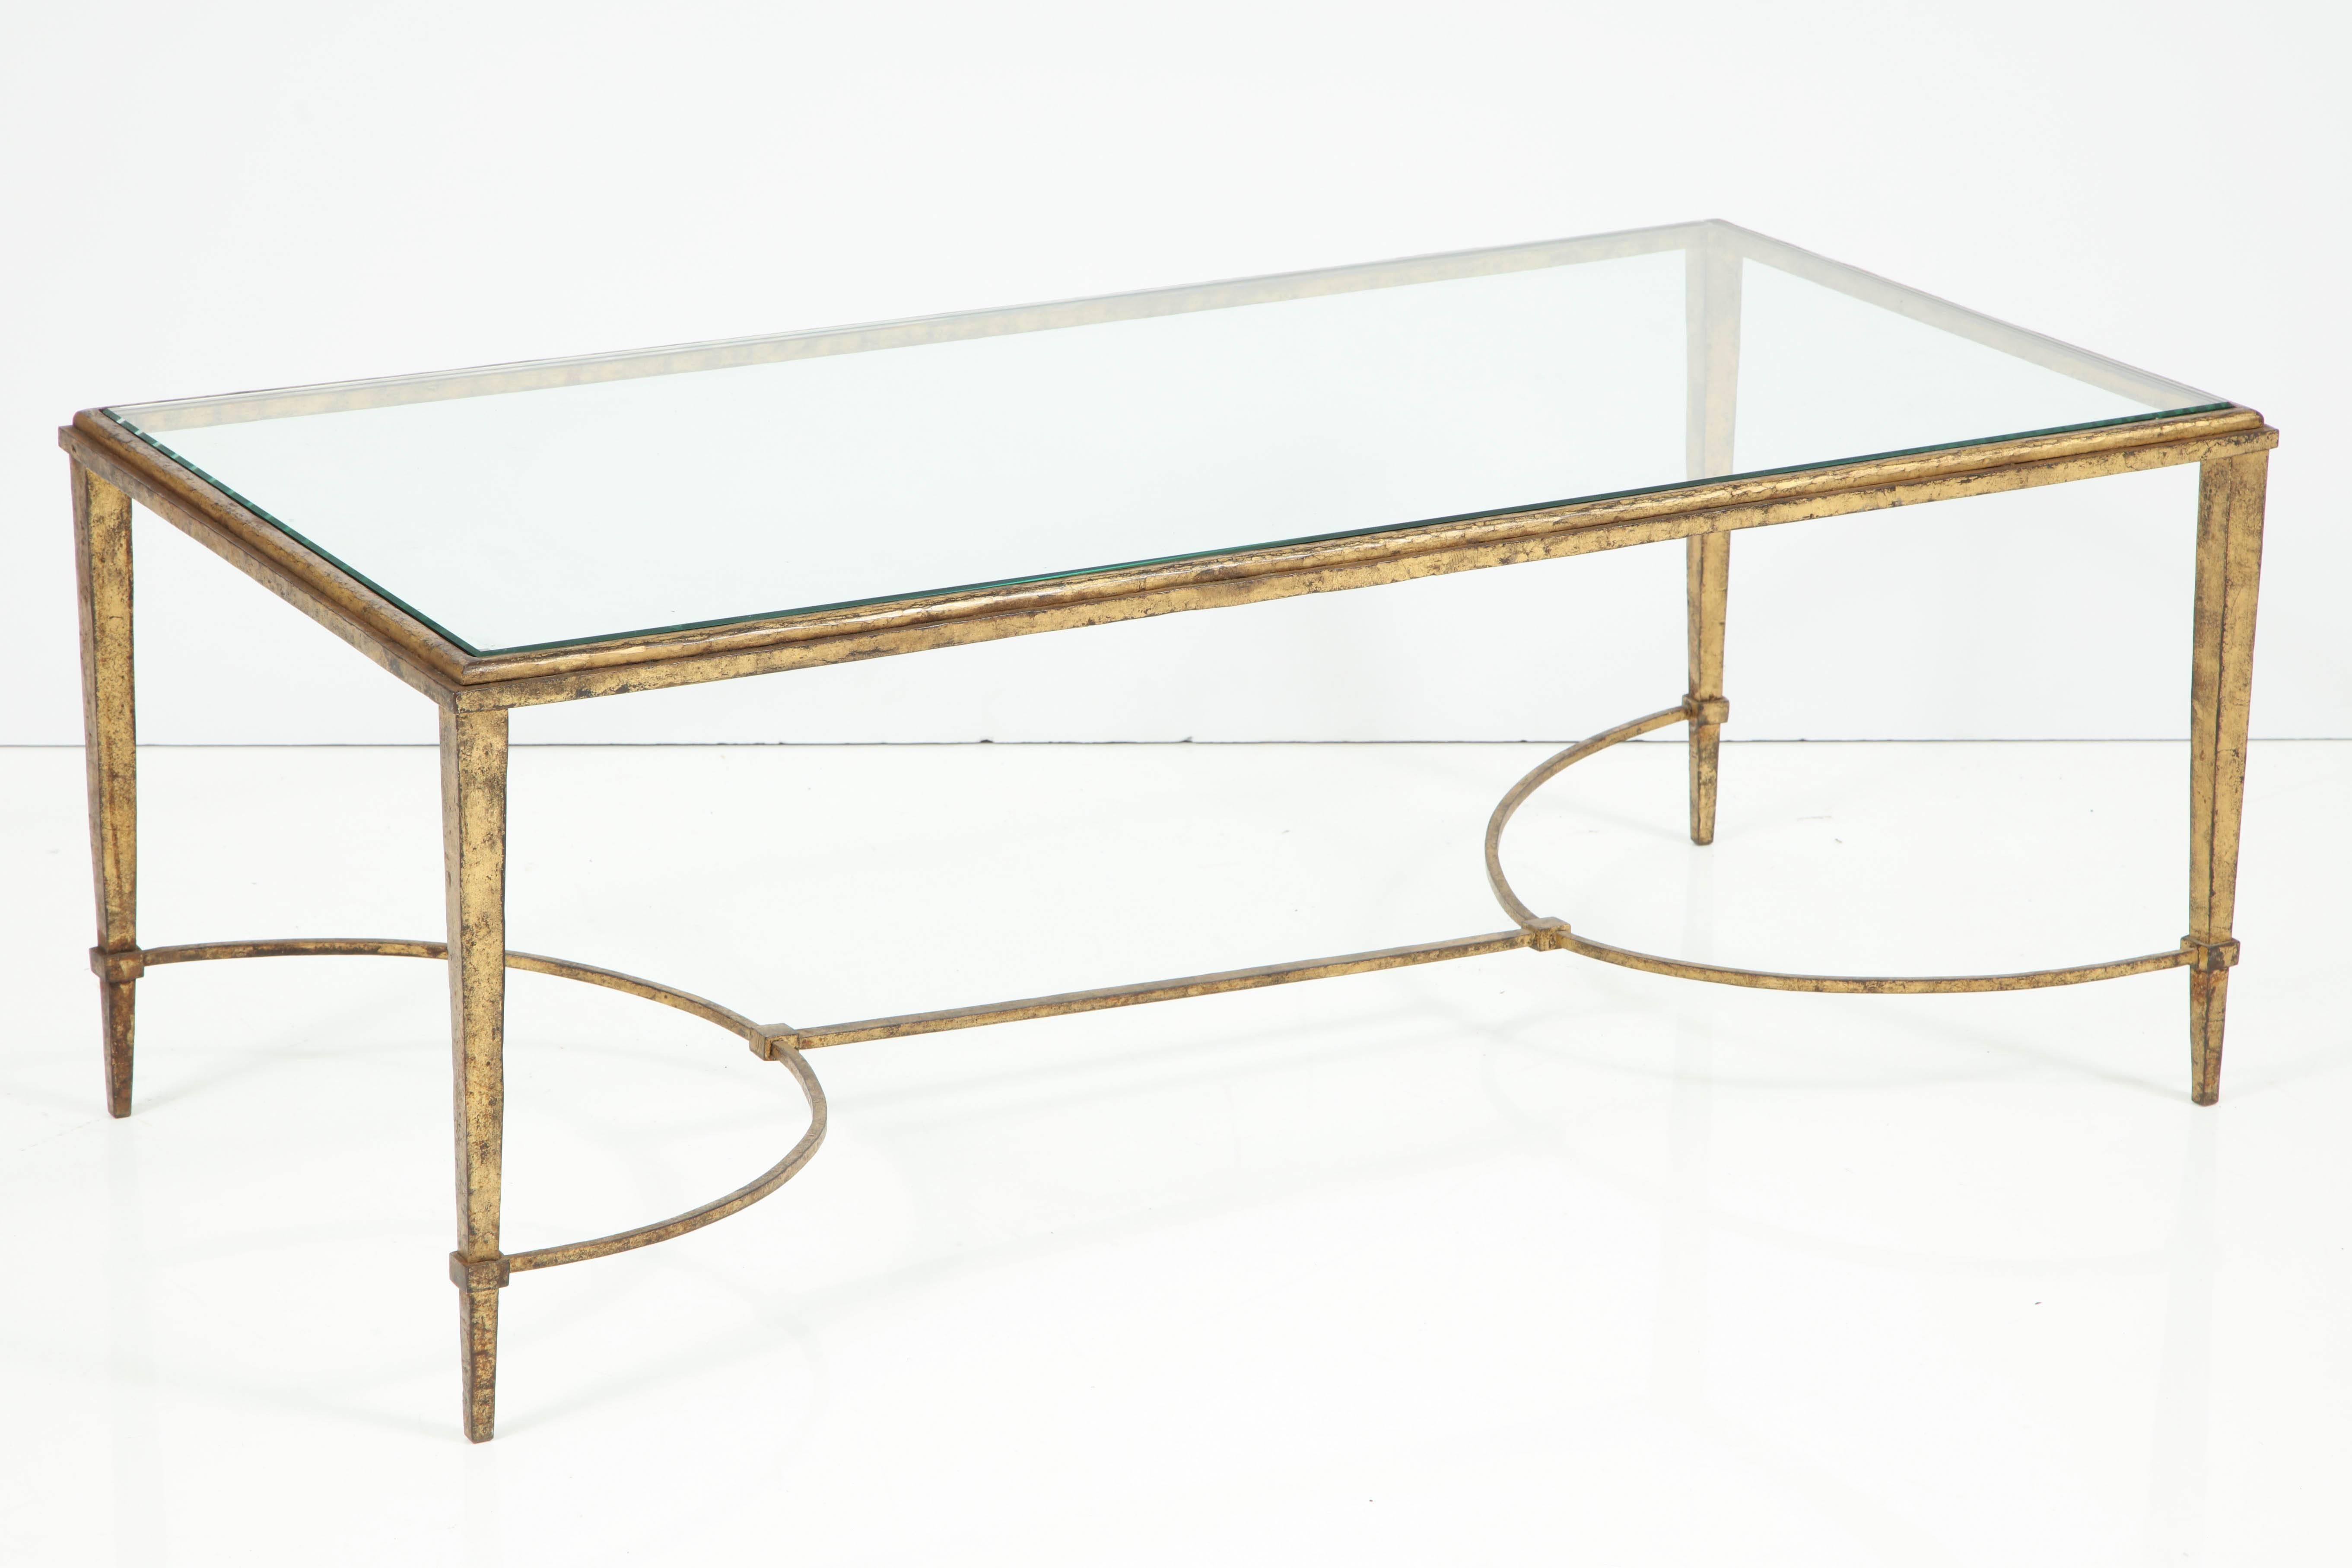 An understated, yet very chic and elegant cocktail table attributed to Maison Ramsay. The frame is gilt iron, with slightly tapered legs connected by a curved stretcher. The beveled glass sits atop a stepped frame. The clean lines of this piece